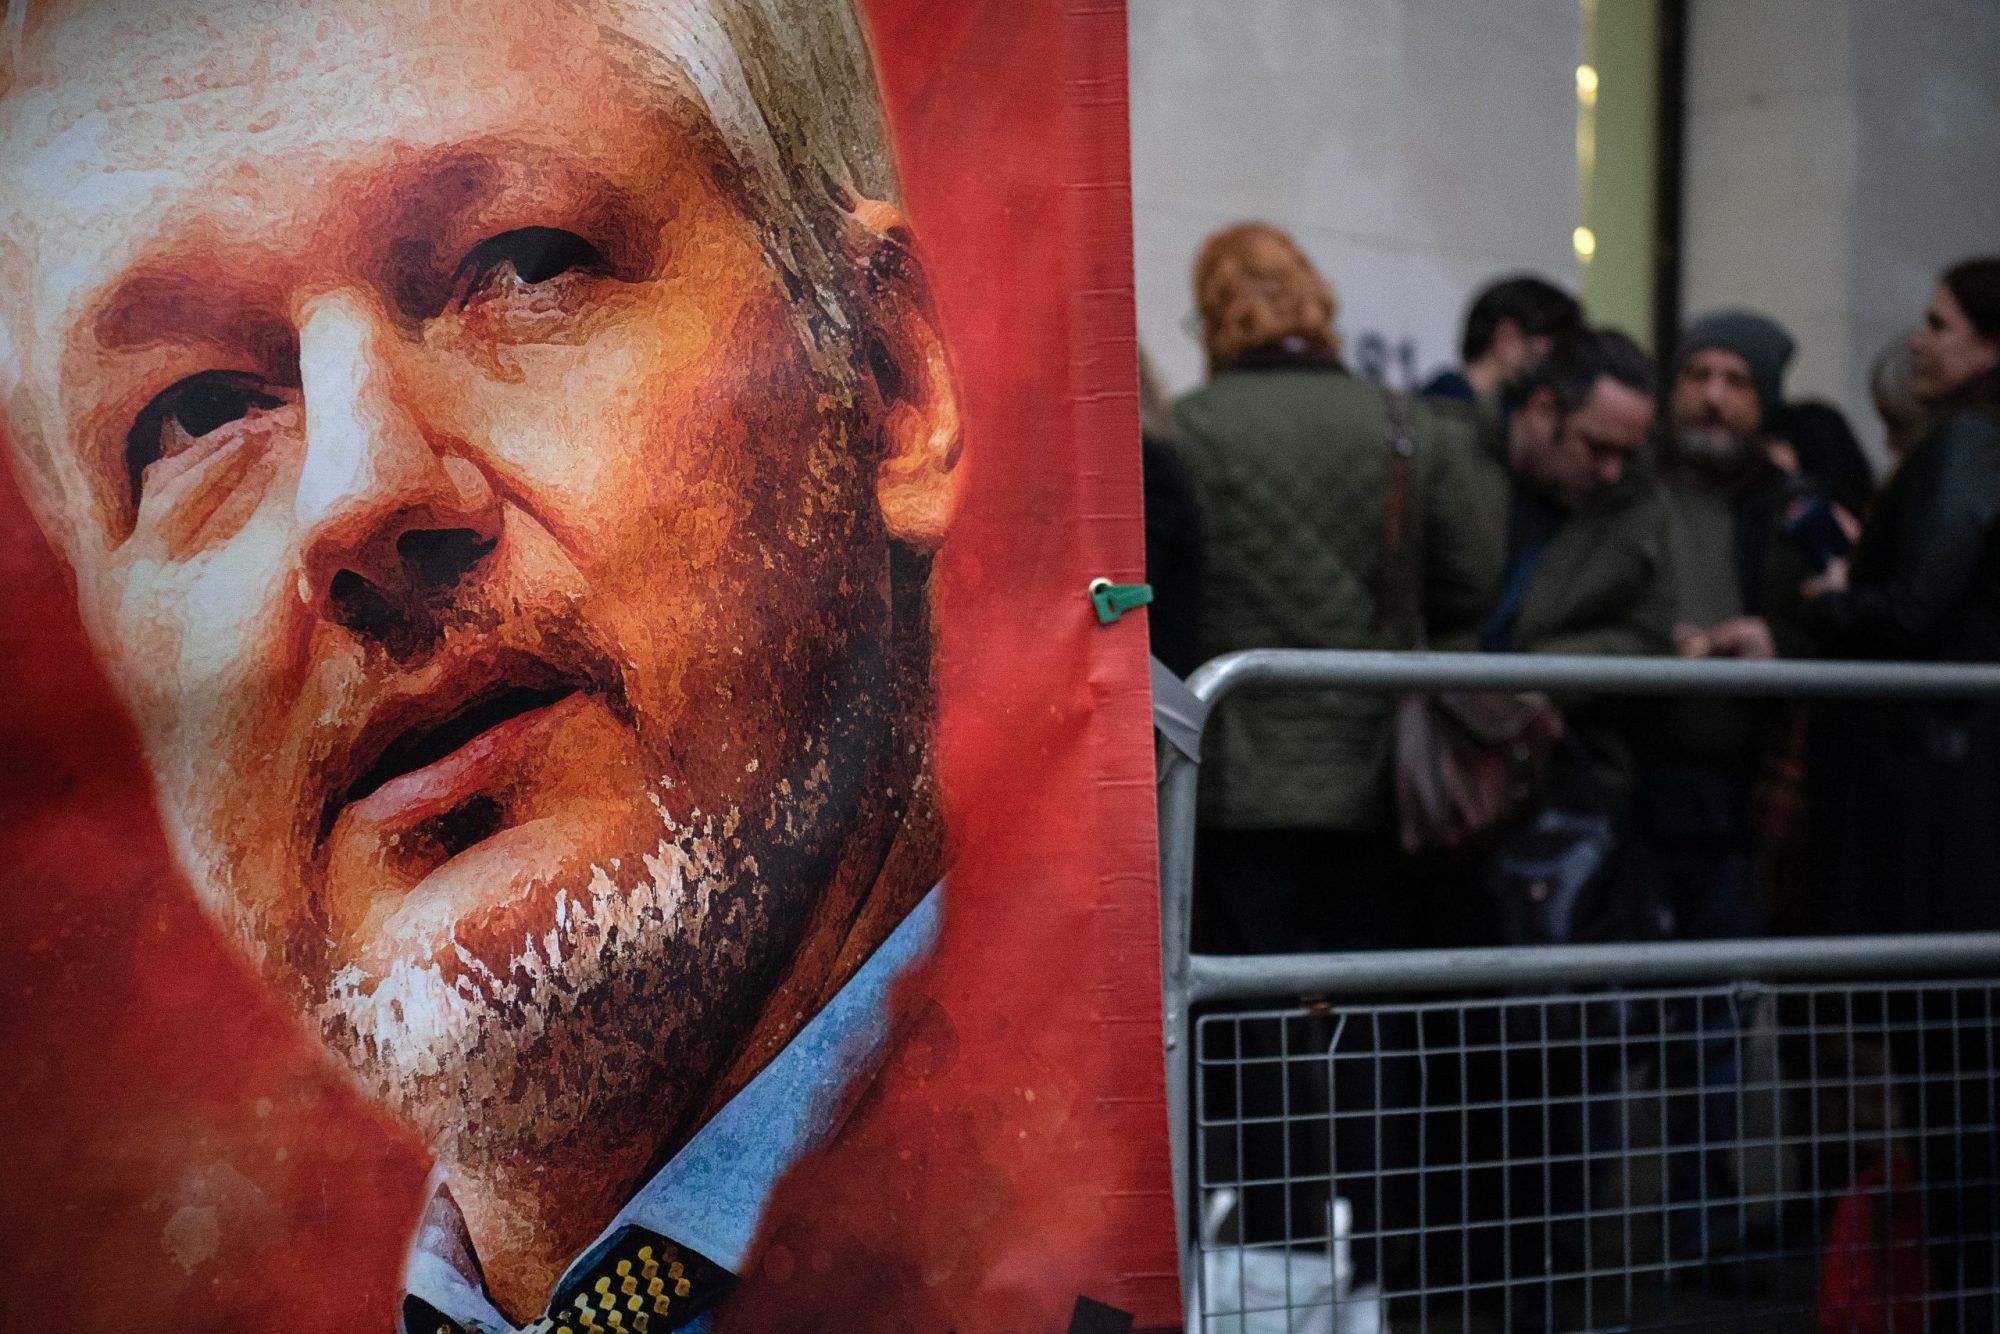 A sign placed by supporters of Wikileaks founder Julian Assange is seen as people wait in line at The City of Westminster Magistrates Court on January 23, 2020, in London, England.